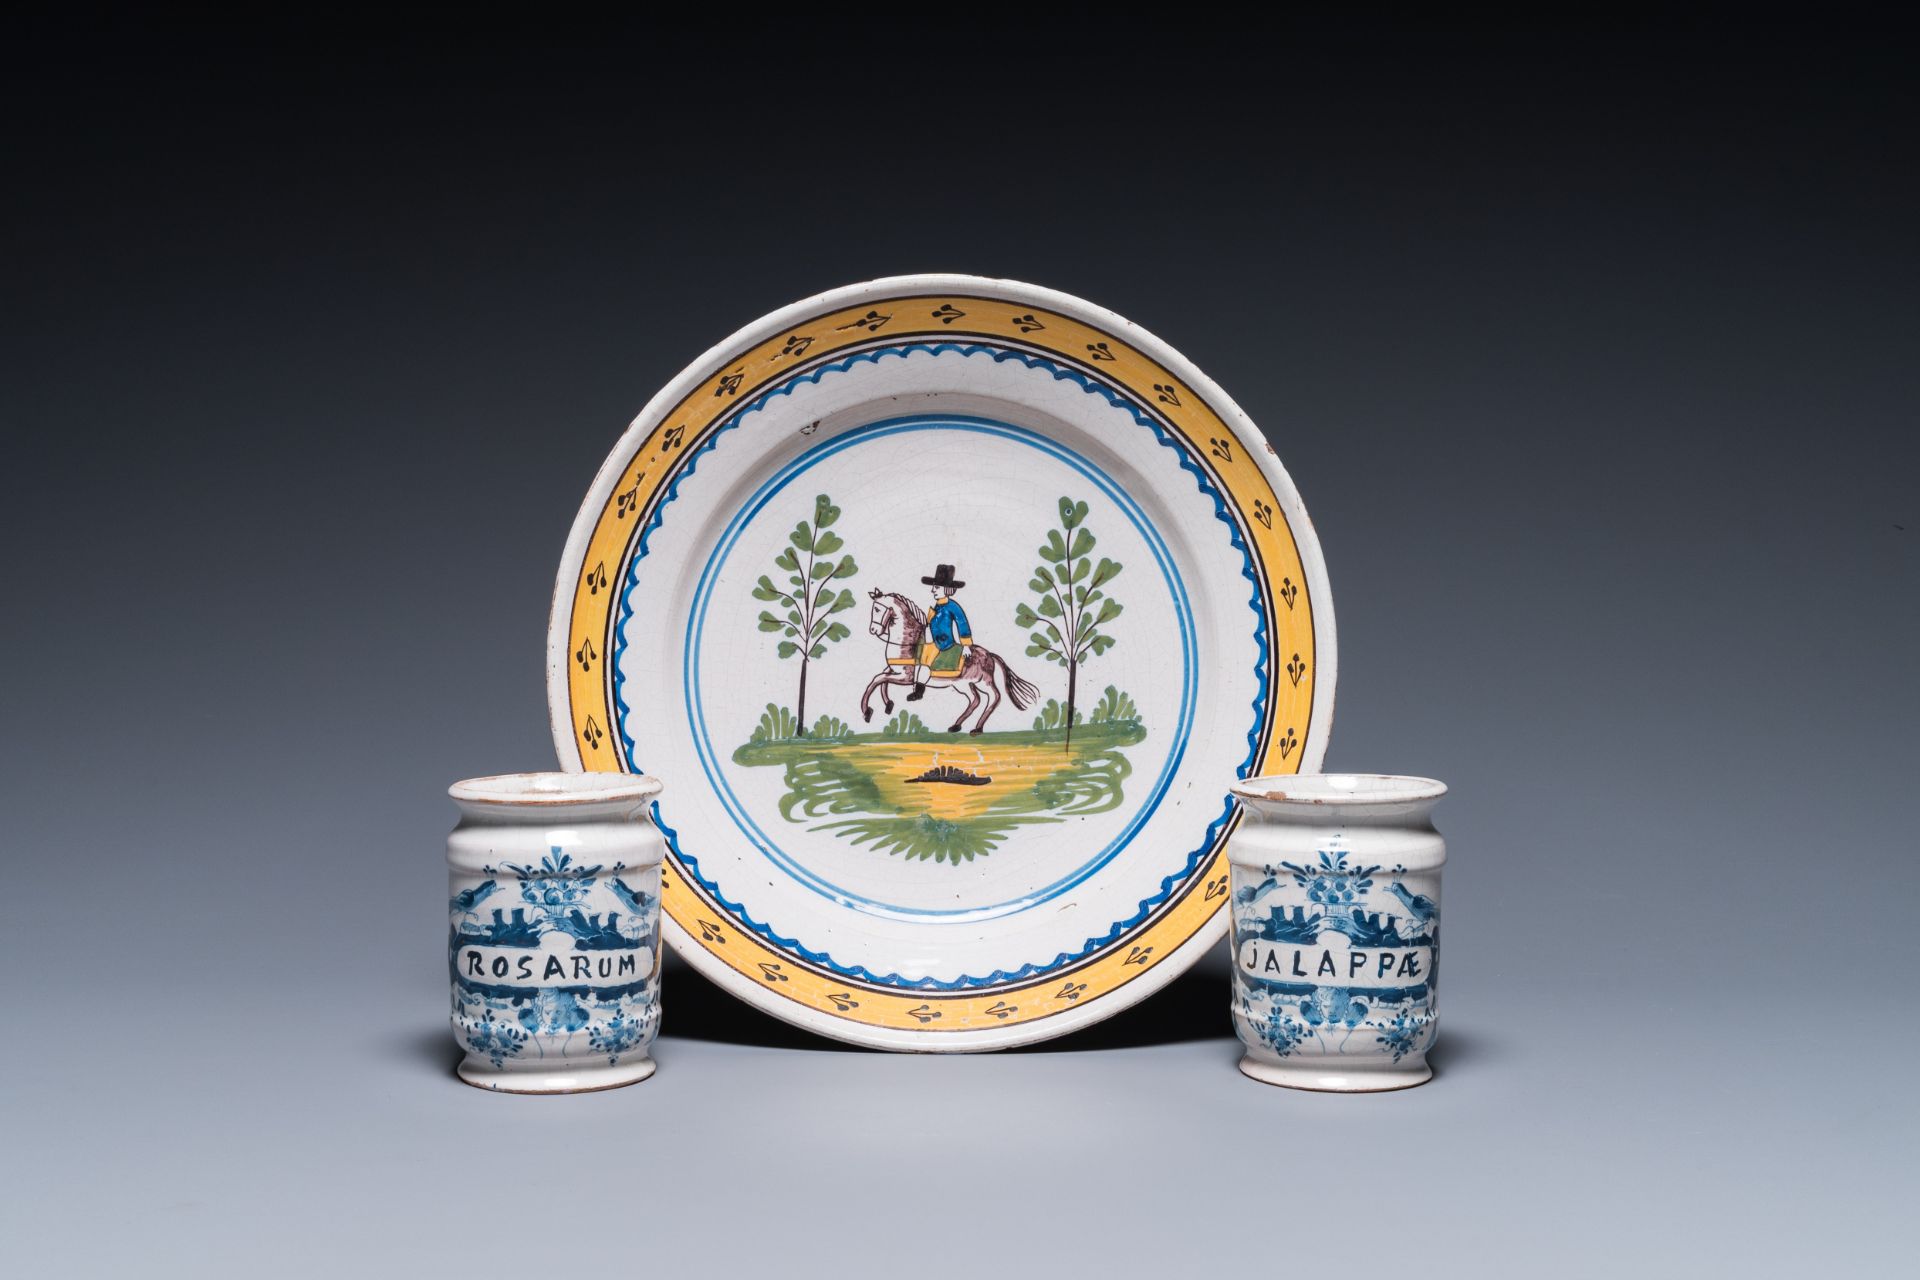 Two Dutch Delft blue and white drug jars and a polychrome Brussels faience dish with a rider on hors